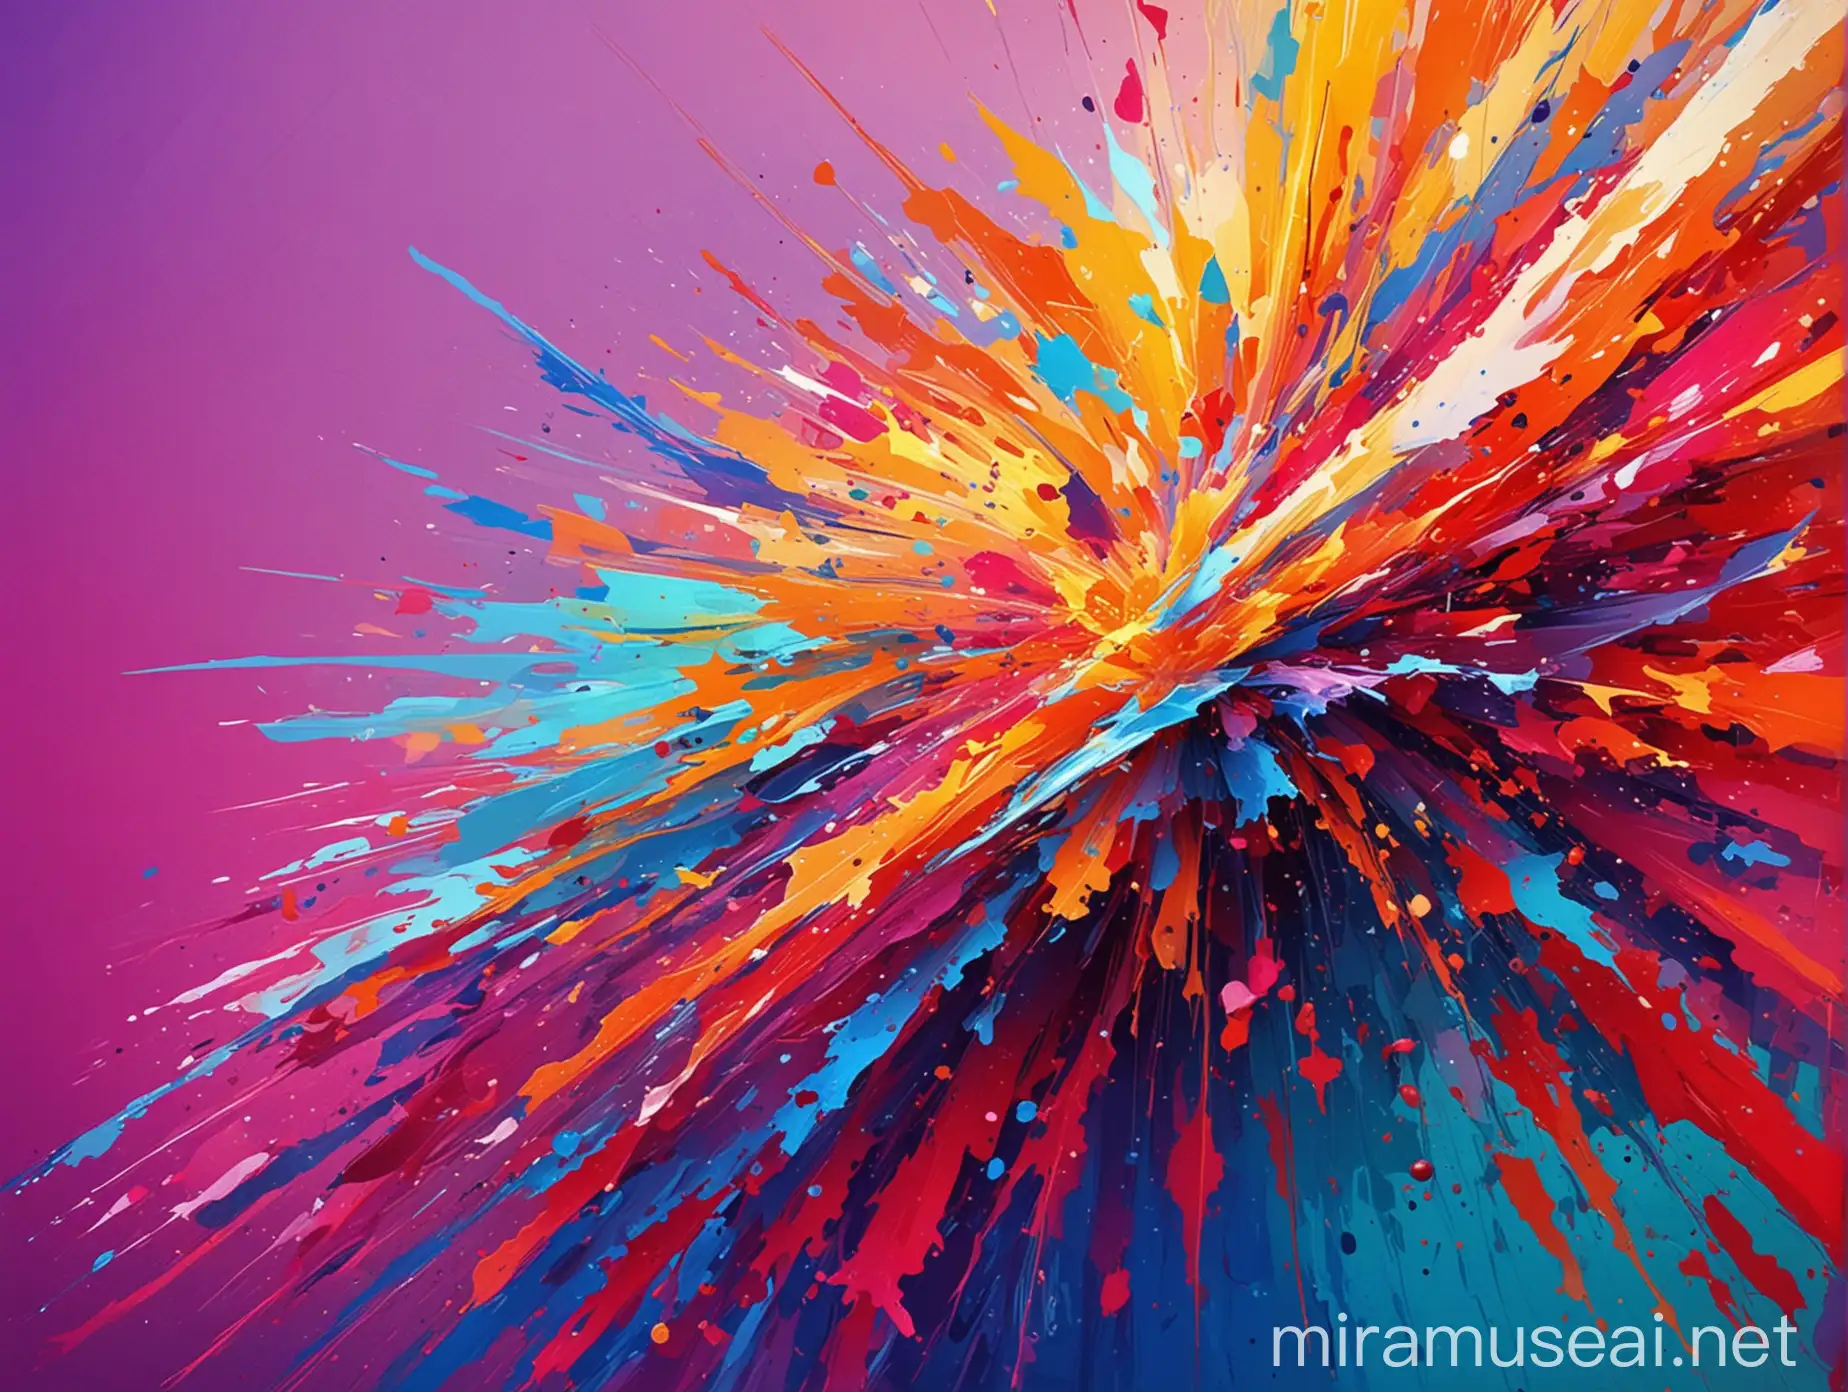 Vibrant Abstract Art with Bright Colors on a Unique Background